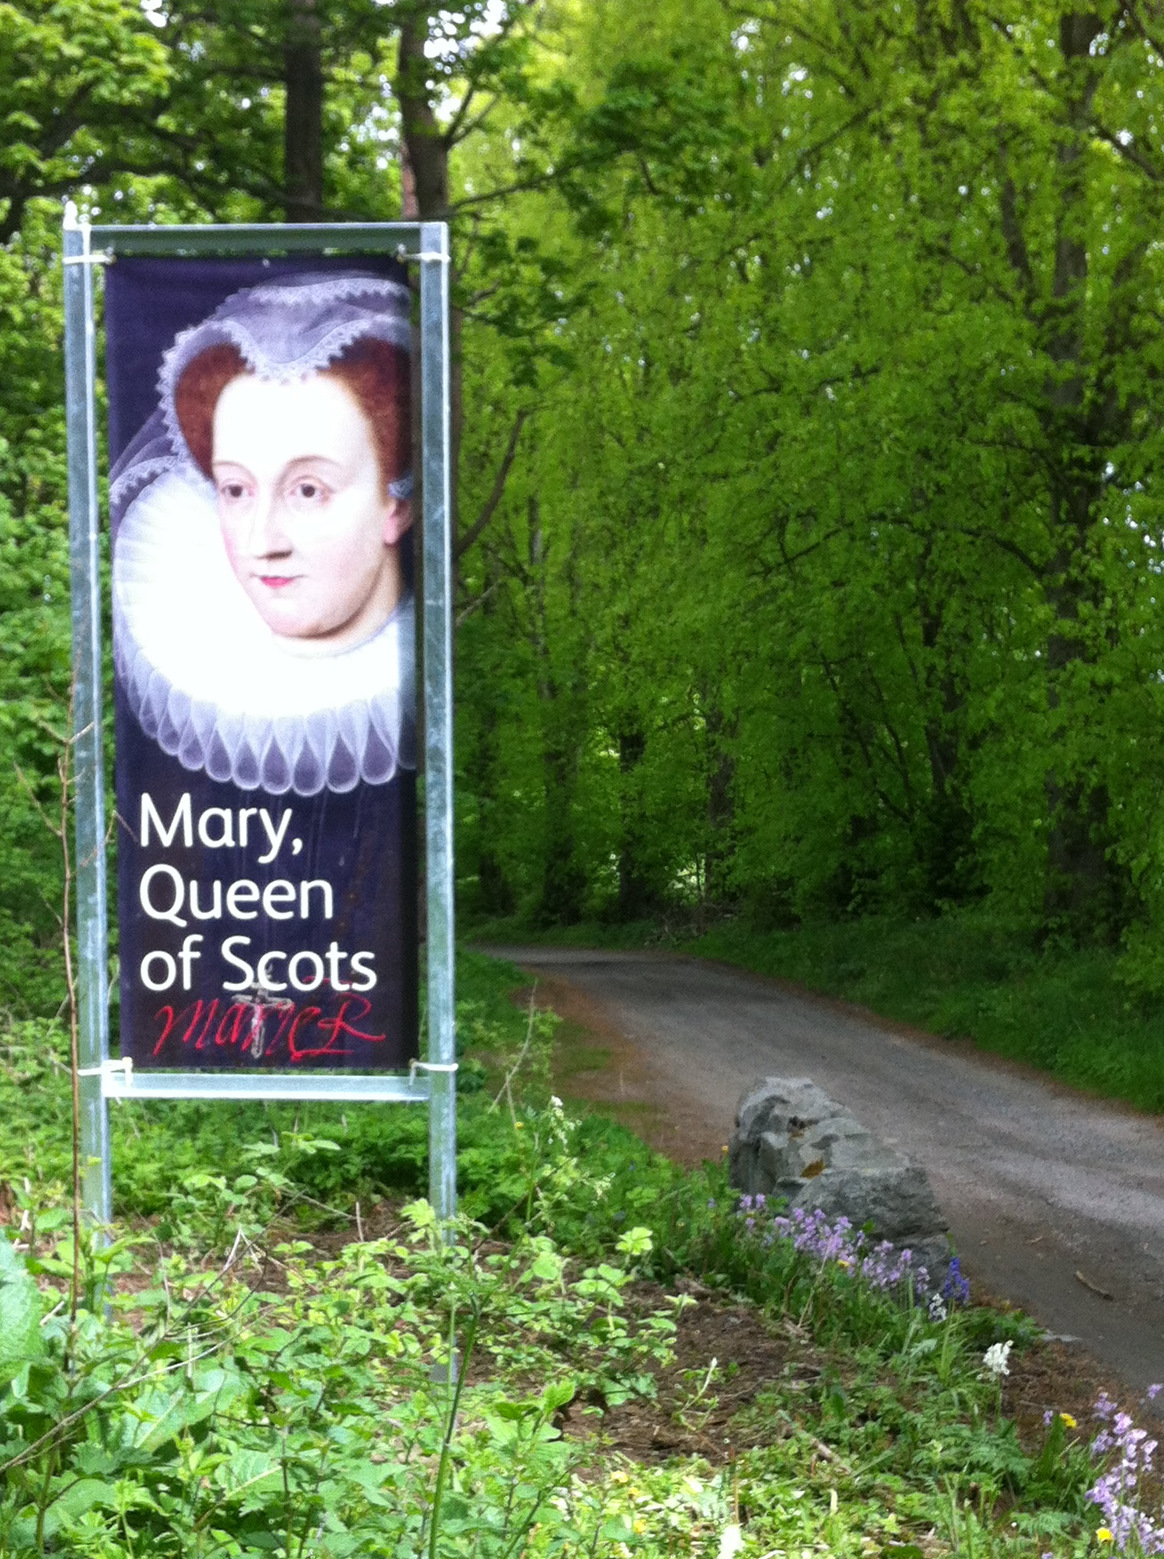 Banner depicting Mary, Queen of Scots, which was stolen from outside Blairs Museum overnight on June 27/28, 2015